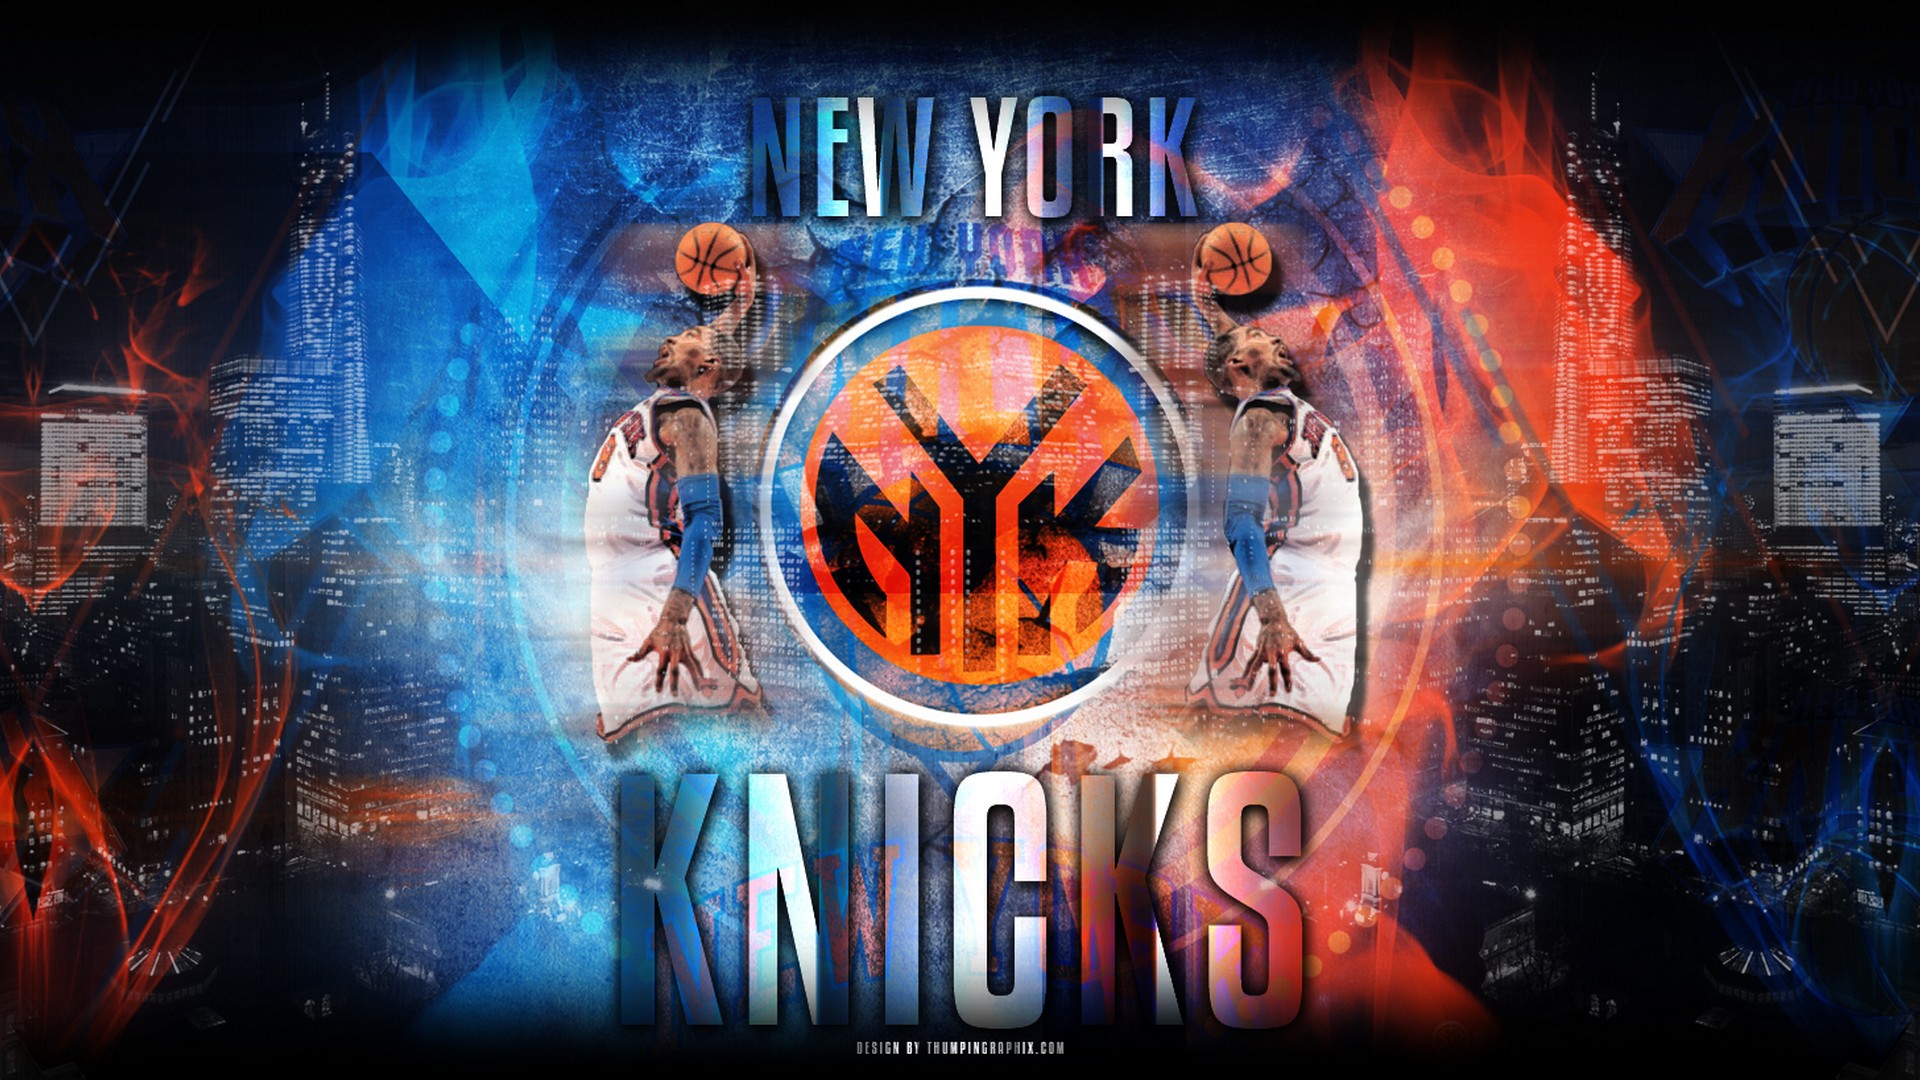 HD Backgrounds NY Knicks with image dimensions 1920x1080 pixel. You can make this wallpaper for your Desktop Computer Backgrounds, Windows or Mac Screensavers, iPhone Lock screen, Tablet or Android and another Mobile Phone device